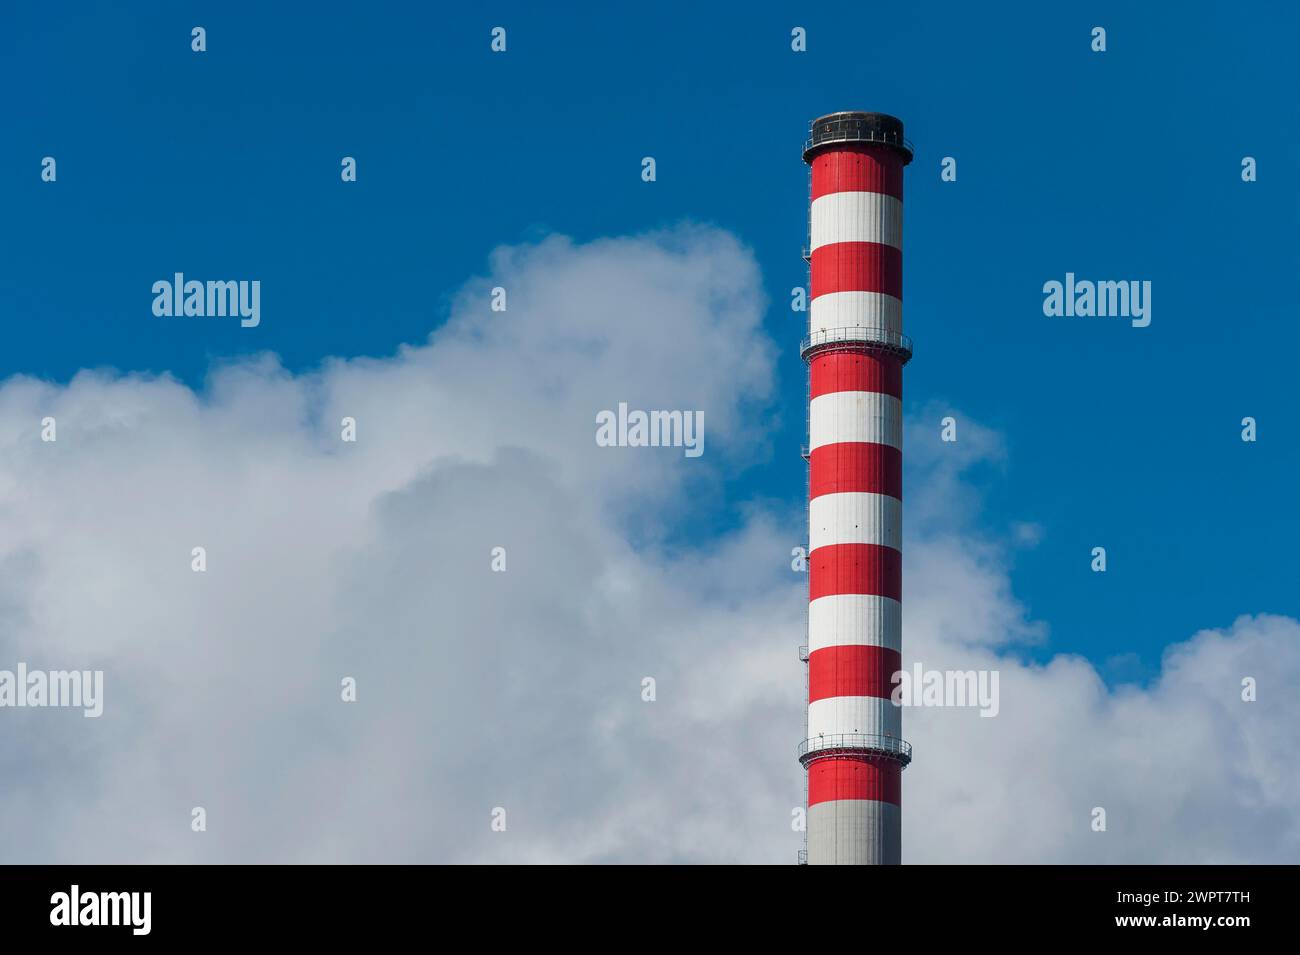 Chimney of a power plant in Sines, red, white, blue sky, power plant, energy, environment, climate, Co2, atmosphere, air pollution, exhaust fumes Stock Photo